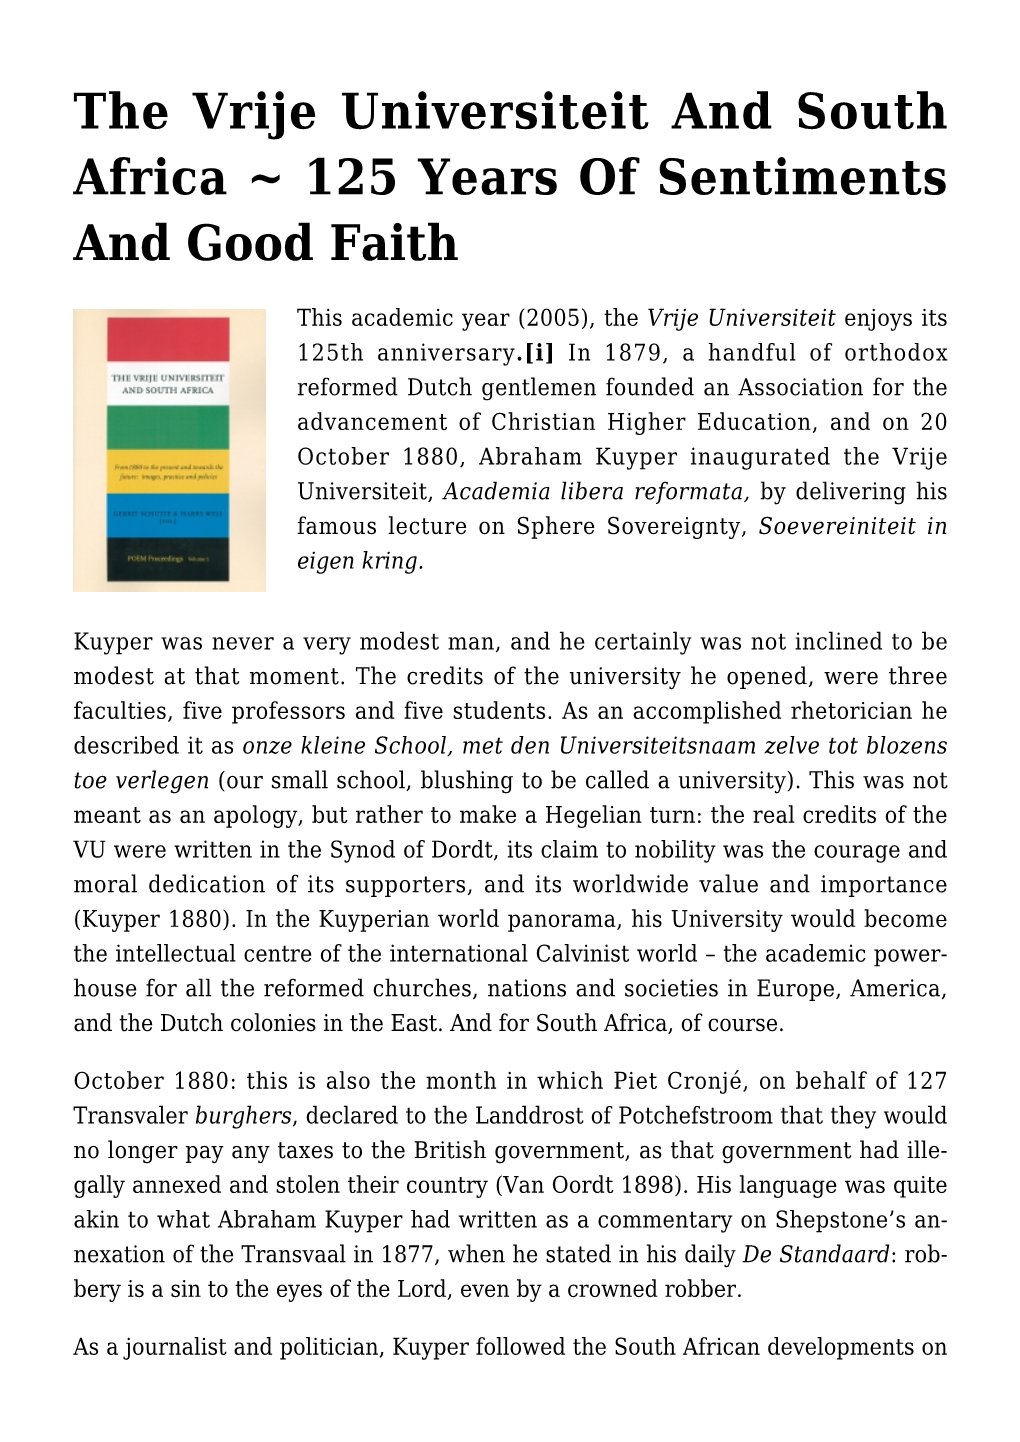 The Vrije Universiteit and South Africa ~ 125 Years of Sentiments and Good Faith